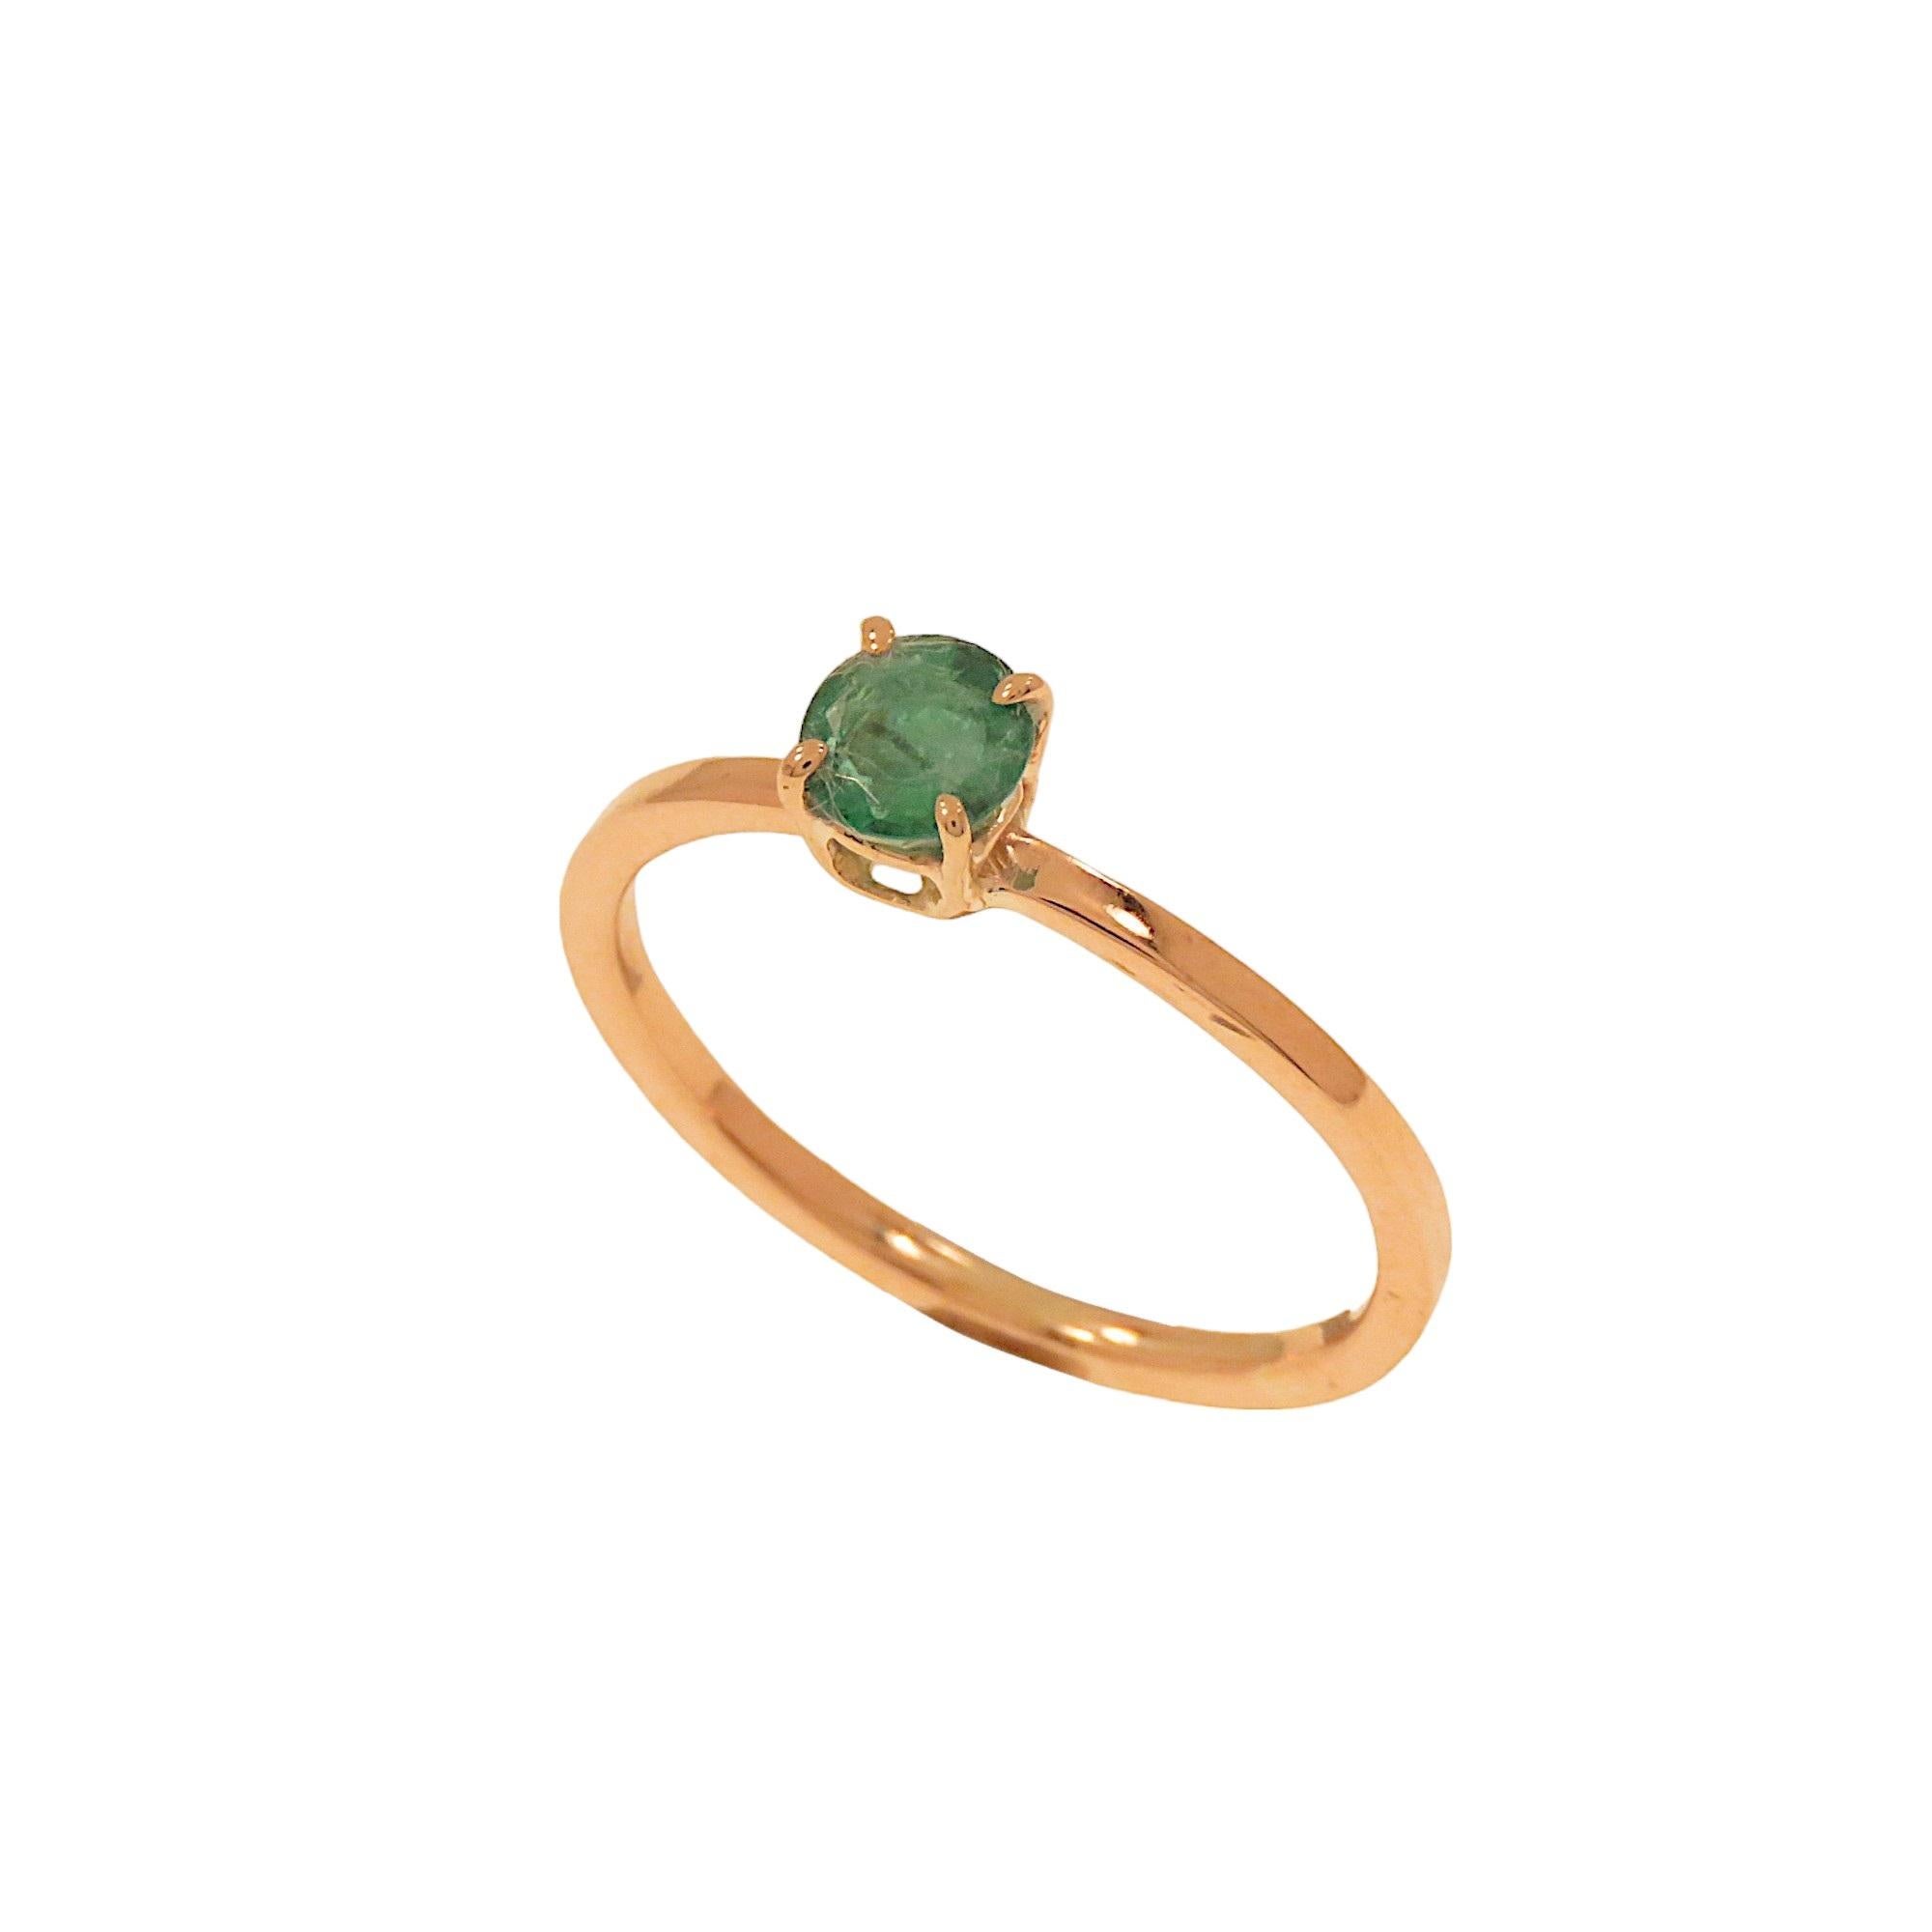 Elegant brilliant-cut emerald ring mounted on 9k rose gold jaw set. The ring is also ideal for an engagement gift. The jewelry was made entirely by hand in our workshop in Milan. The brilliant-cut emerald weighs 0.45 carats. Ring size: Italian 11,